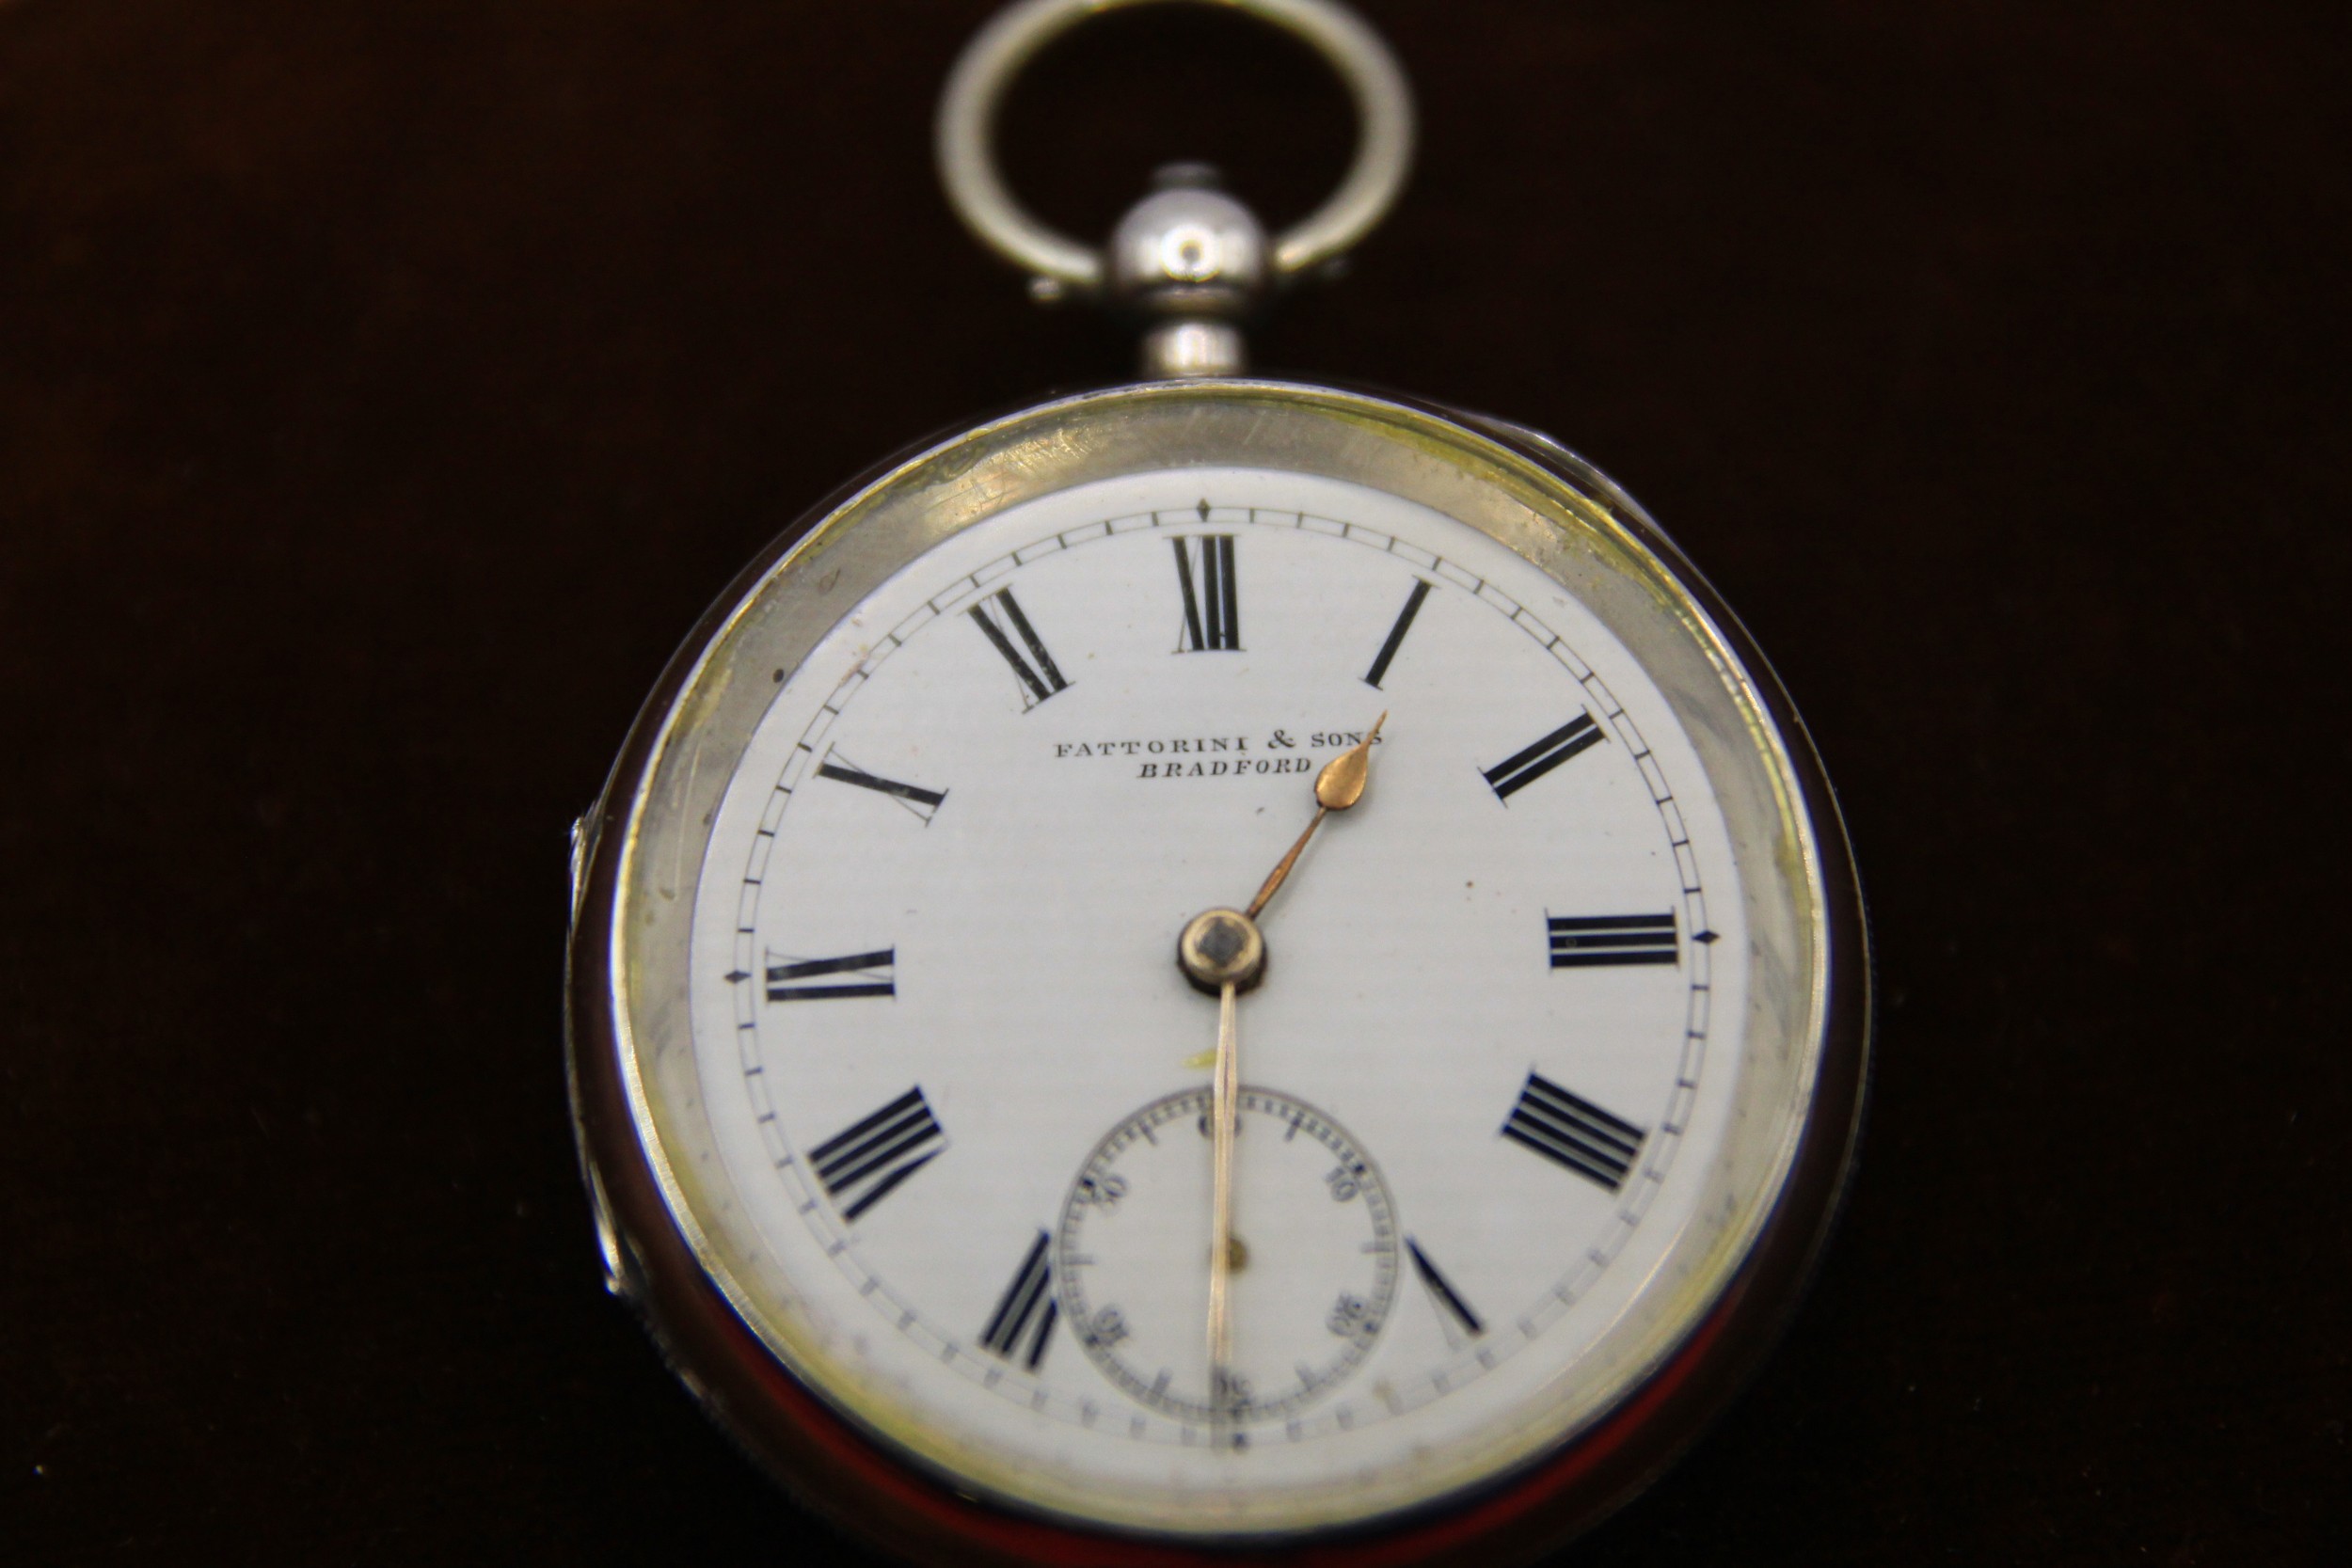 A Silver Pocket Watch marked for Fattorini & Sons of Bradford